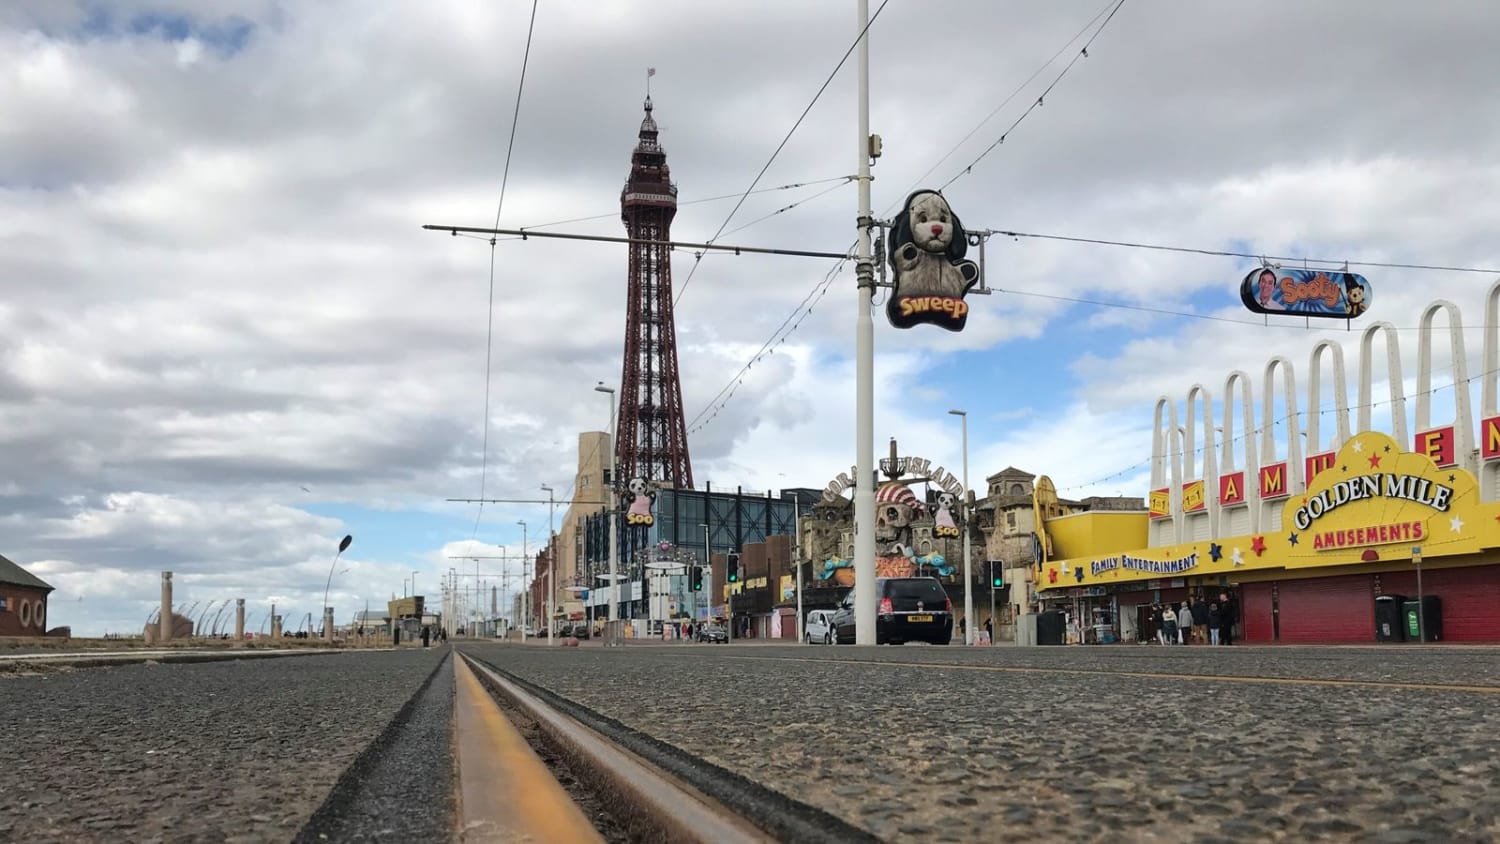 Coronavirus: Test and trace 'could cut Blackpool's rising transmission rate'